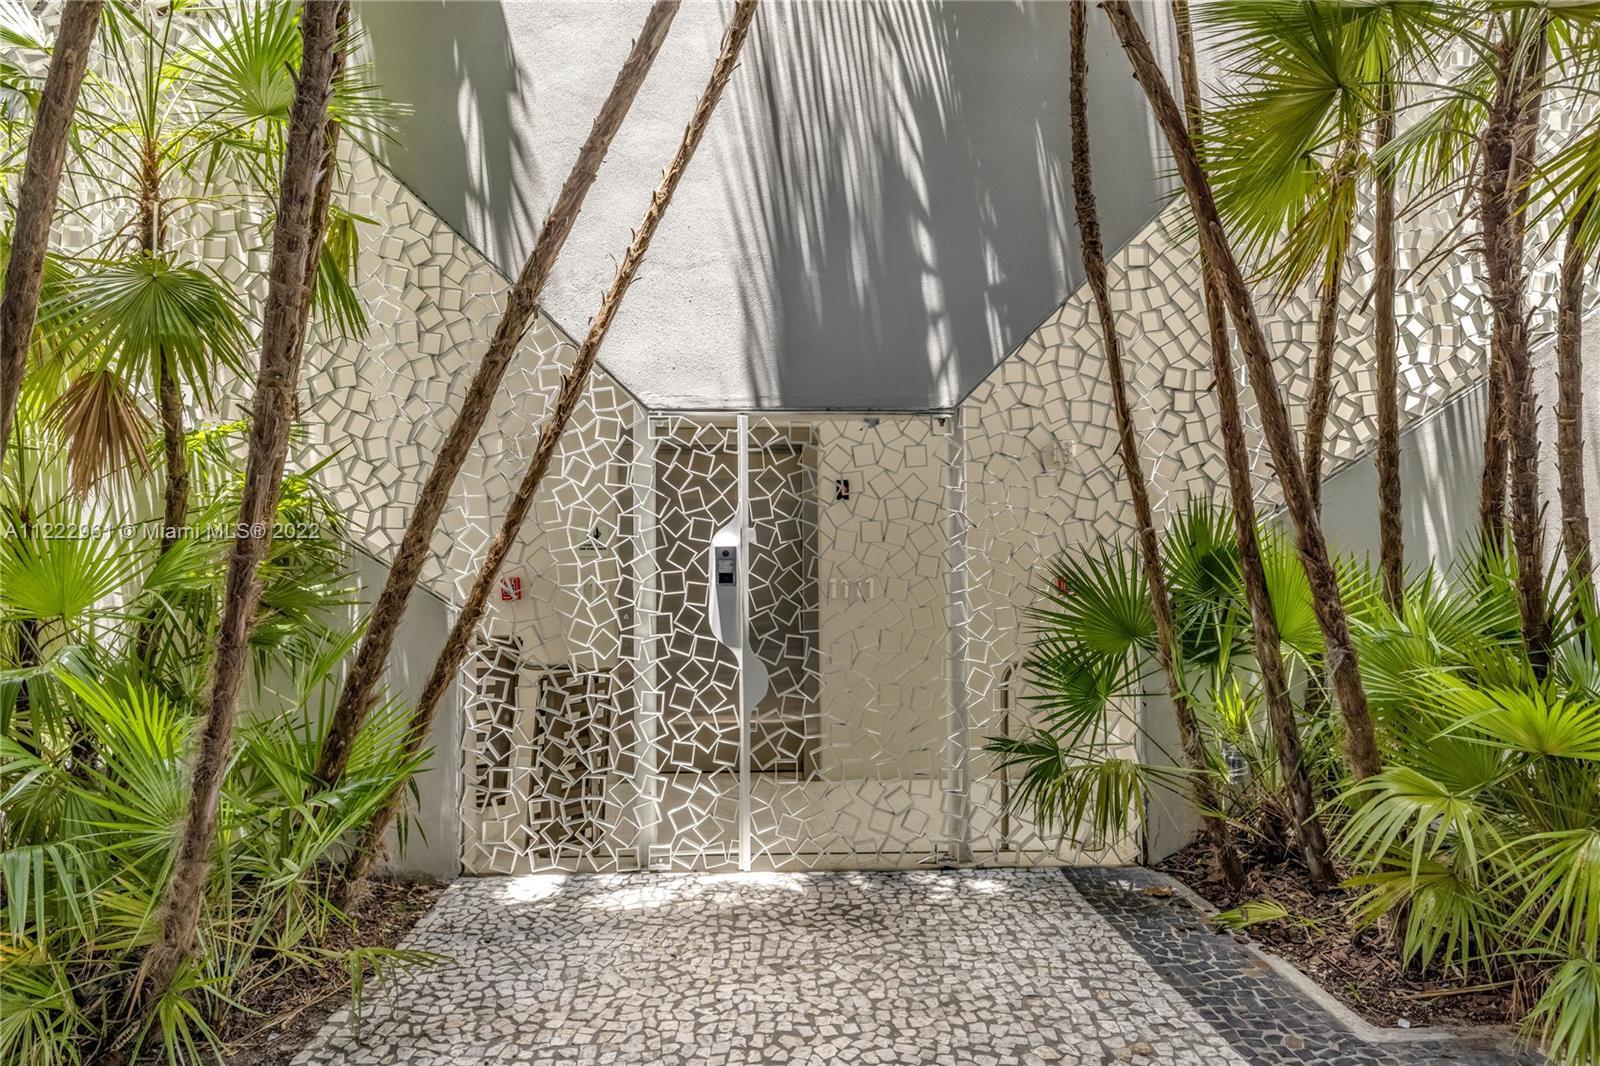 Sophisticated urbanites will be amazed by this sleek secluded South Beach oasis. This unique residen